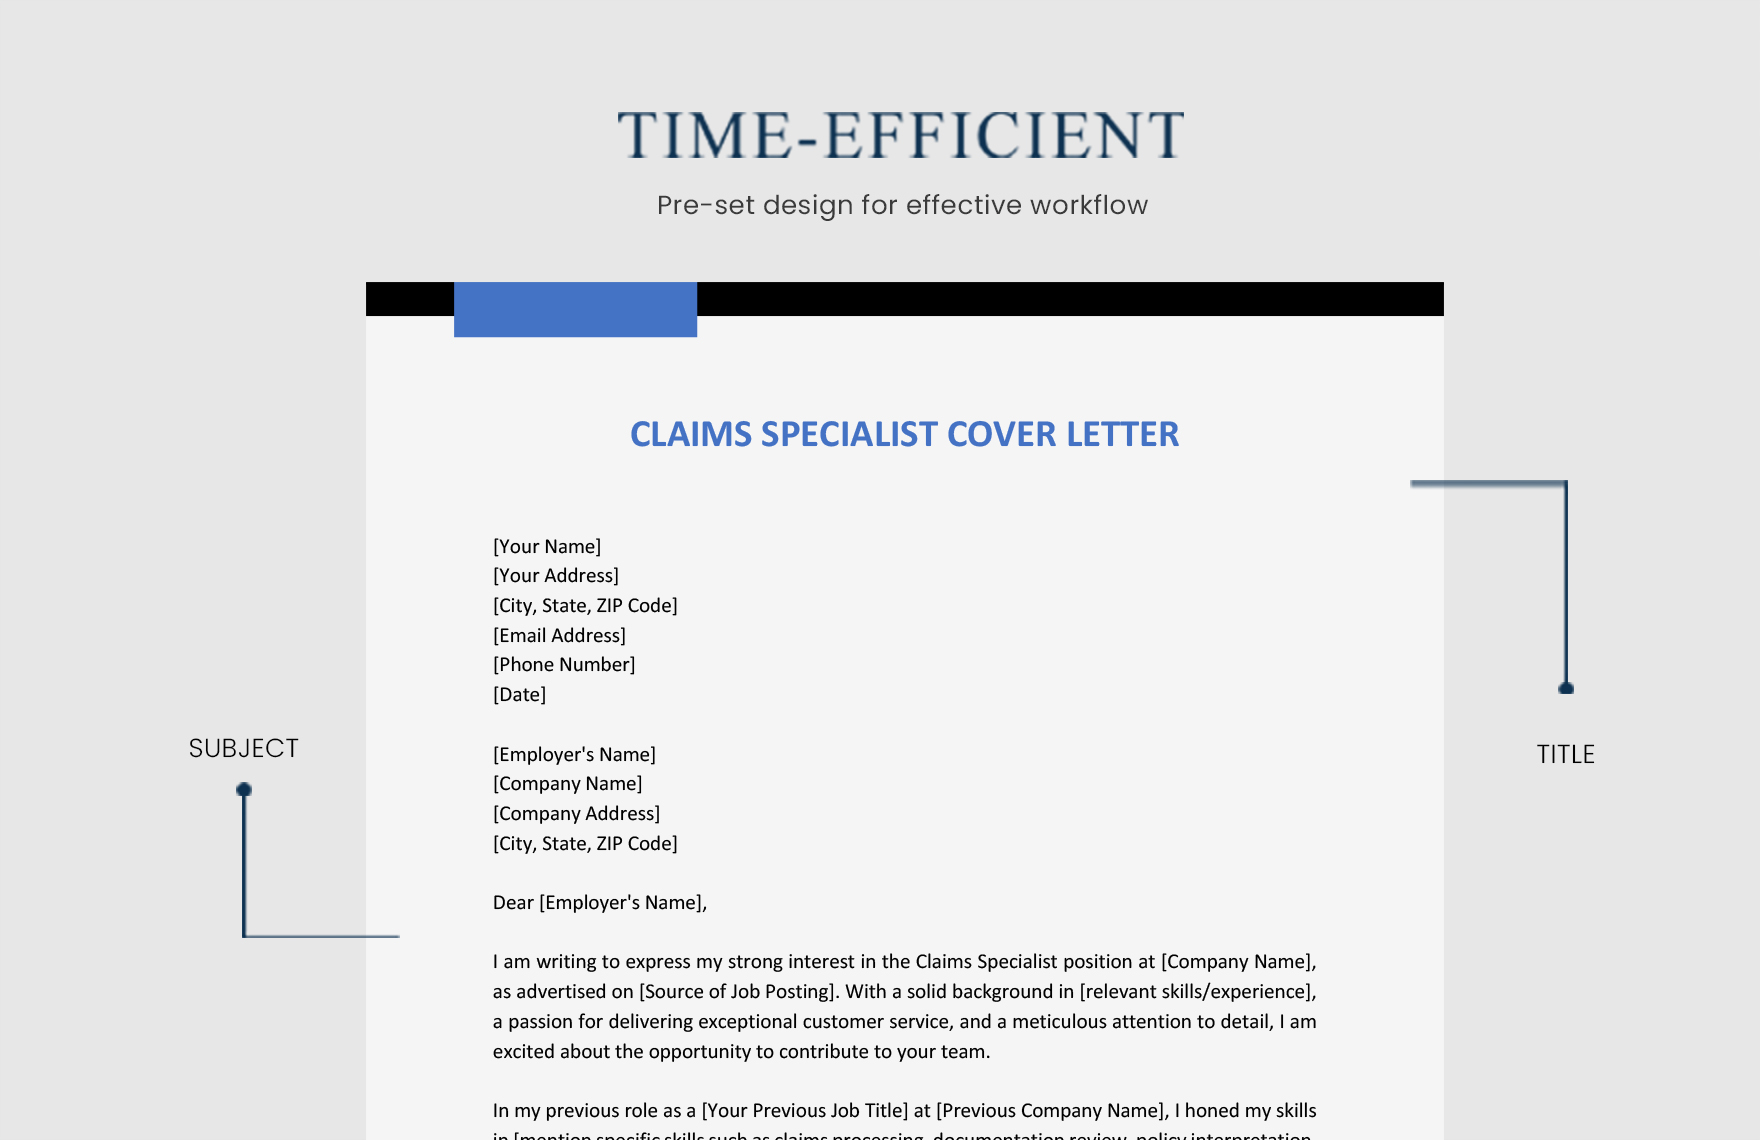 Claims Specialist Cover Letter`